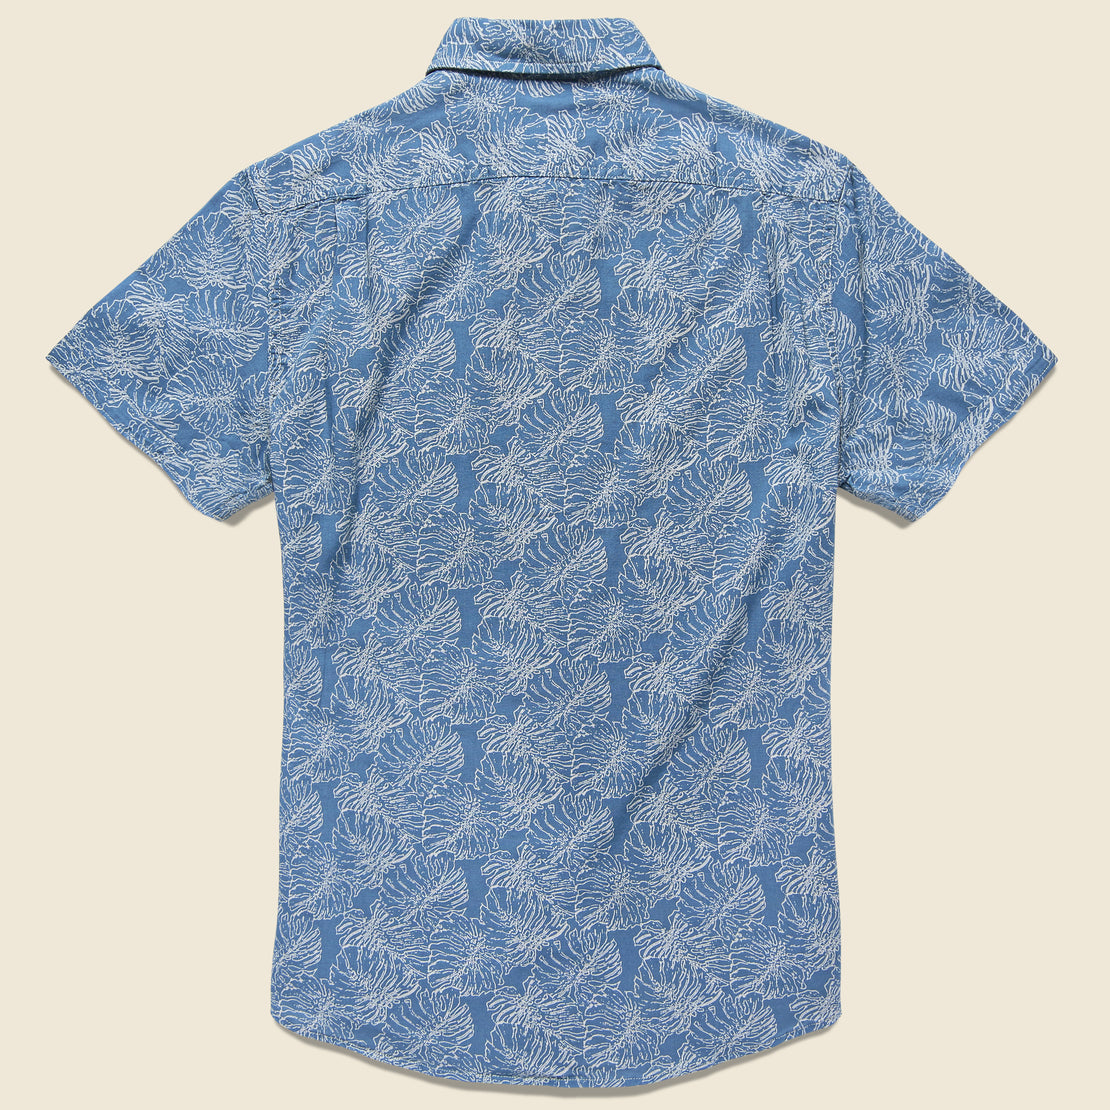 Leaf Print Summer Weave Shirt - Moonlight Blue - Grayers - STAG Provisions - Tops - S/S Woven - Floral